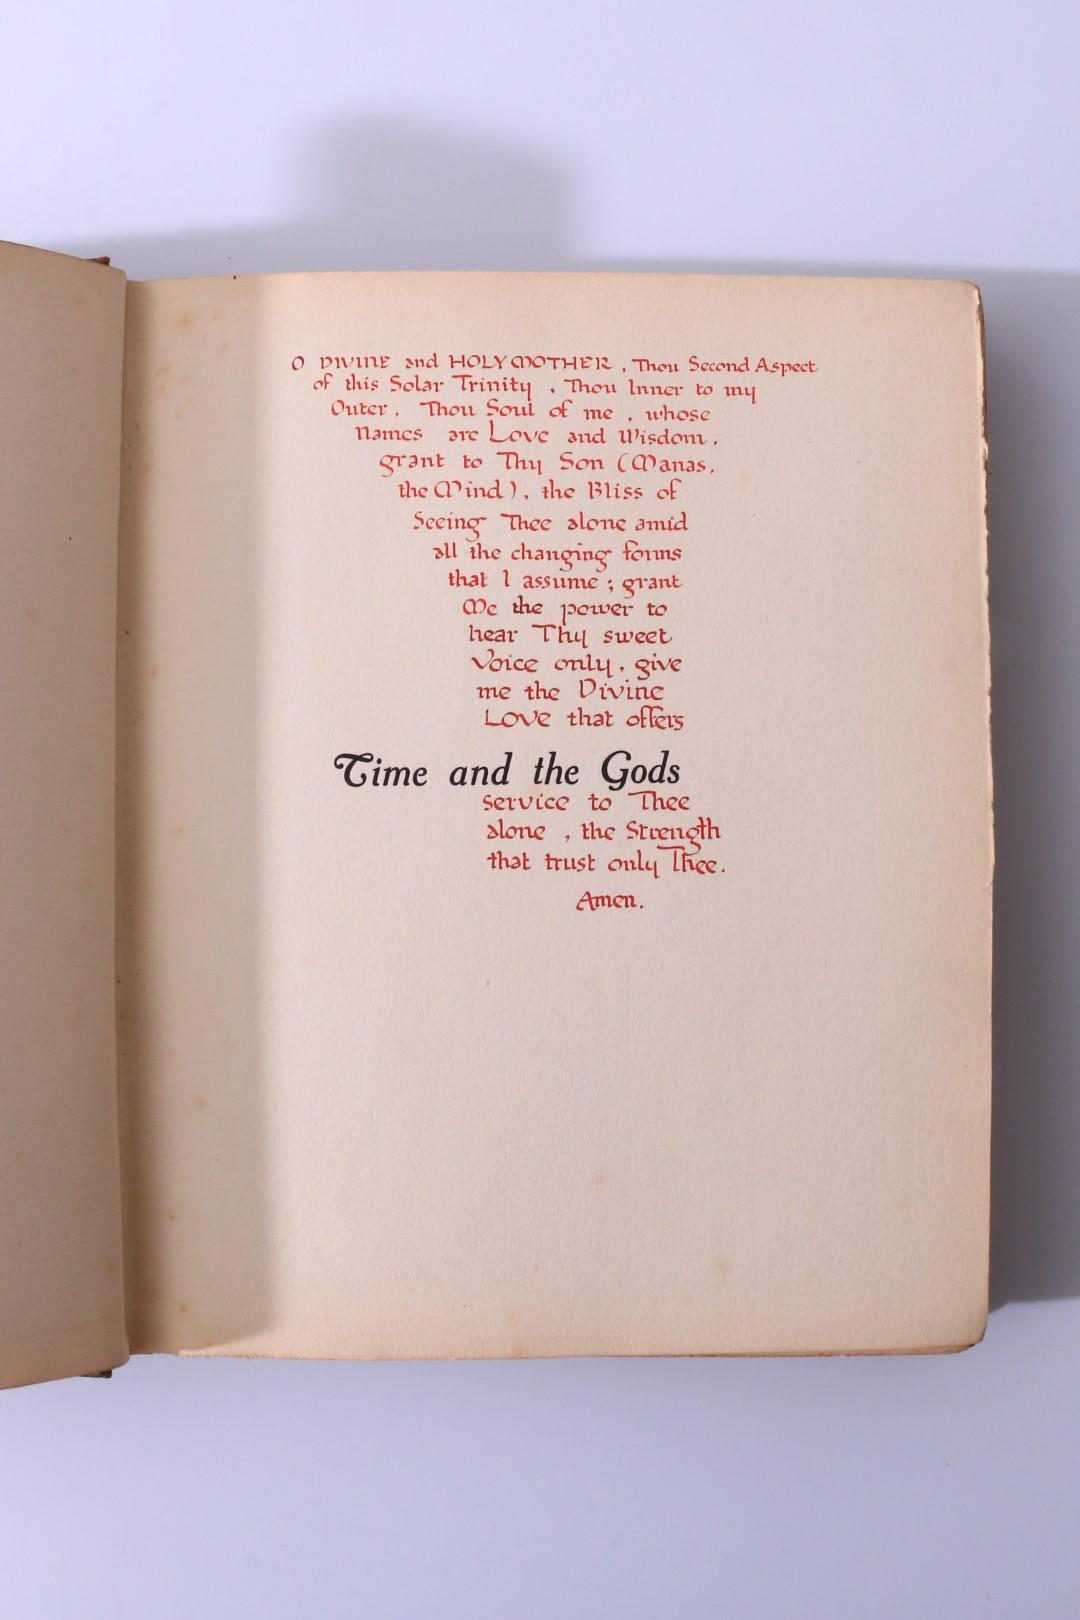 Lord Dunsany - Time and the Gods - Heinemann, 1906, First Edition.